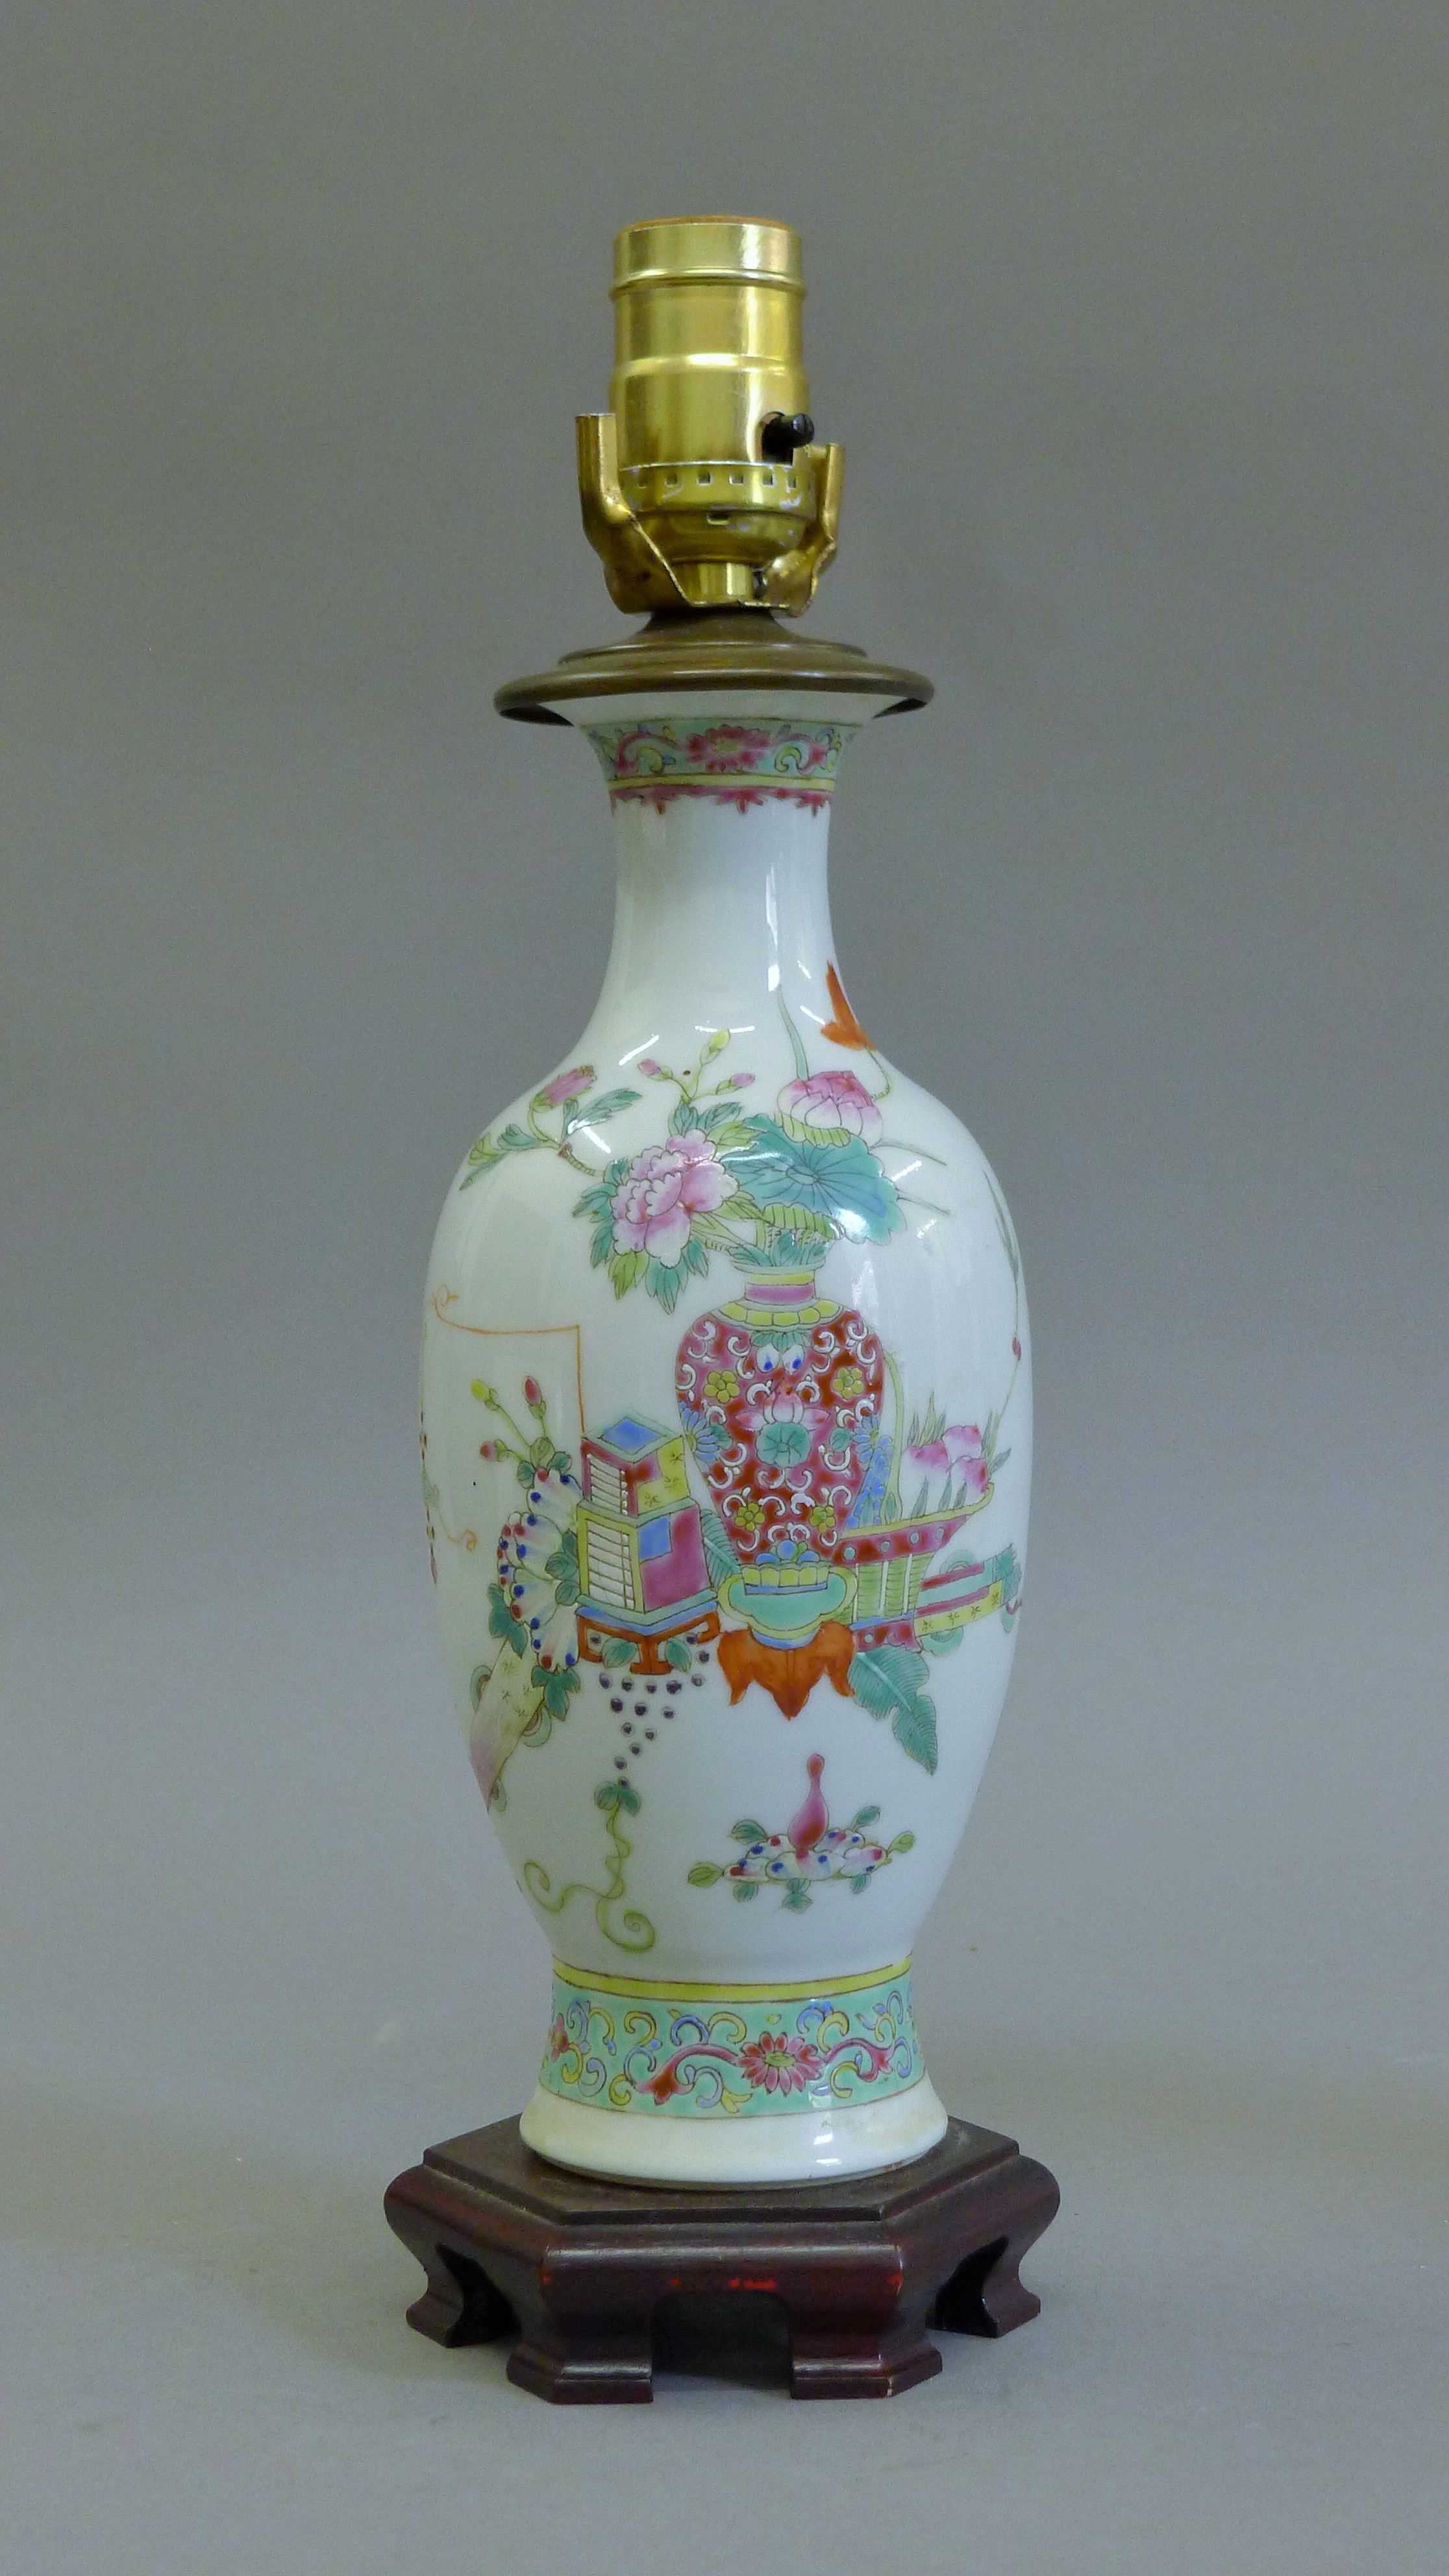 A 19th century Chinese porcelain lamp. 36 cm high overall. - Image 2 of 4